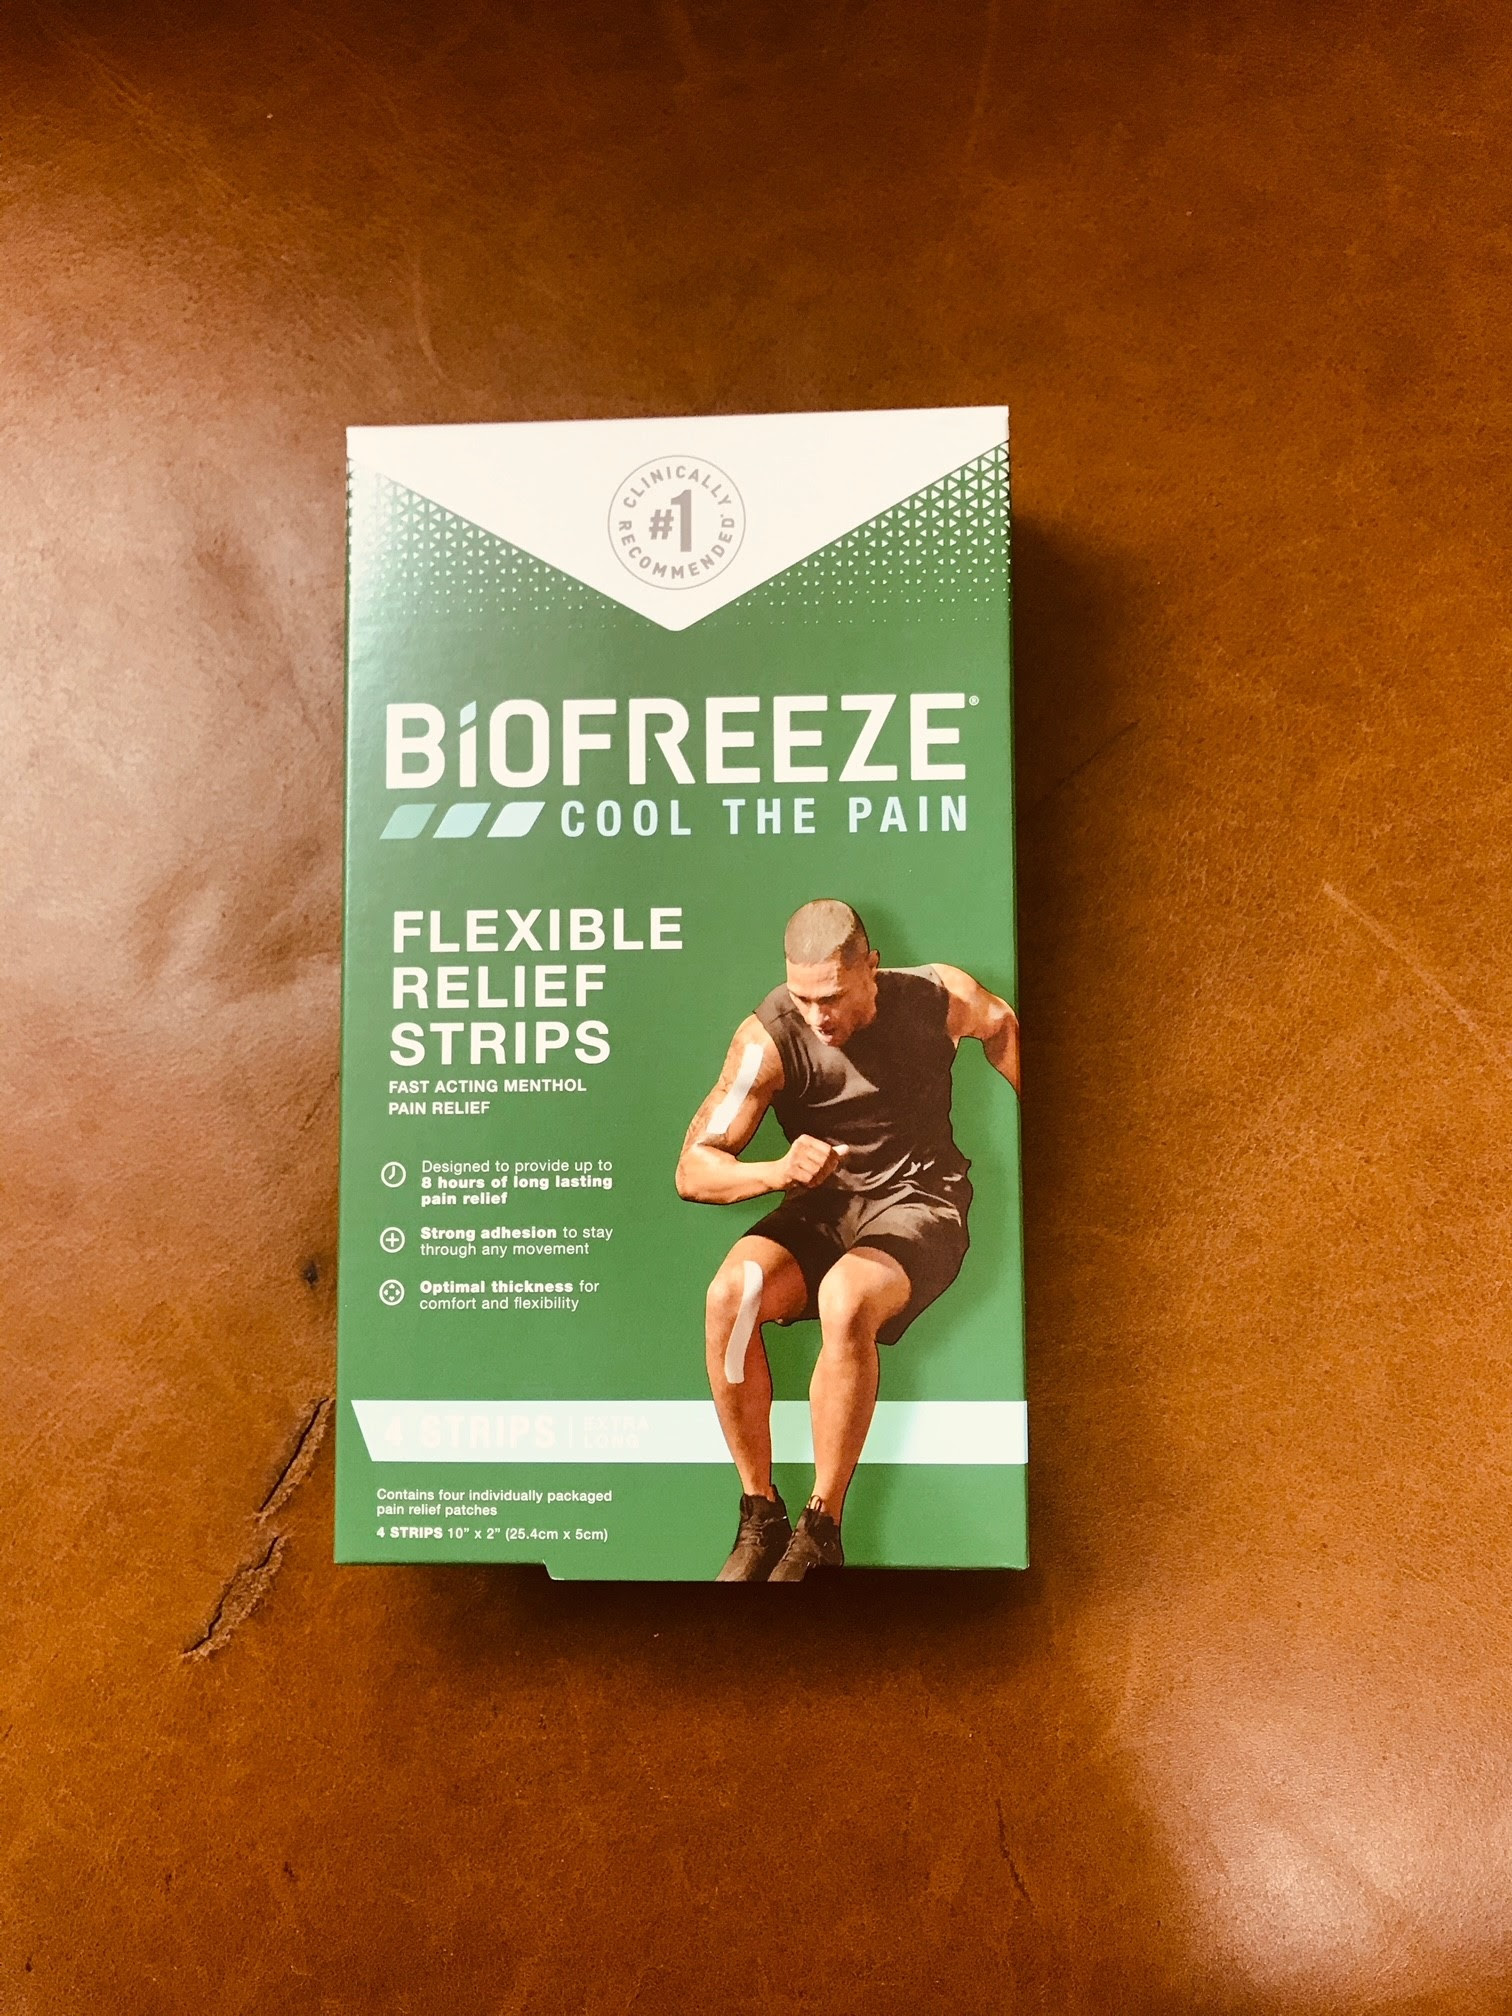 Biofreeze flexible pain relief strips. 22,400boxes. EXW Los Angeles $1.95/box of 4Strips.